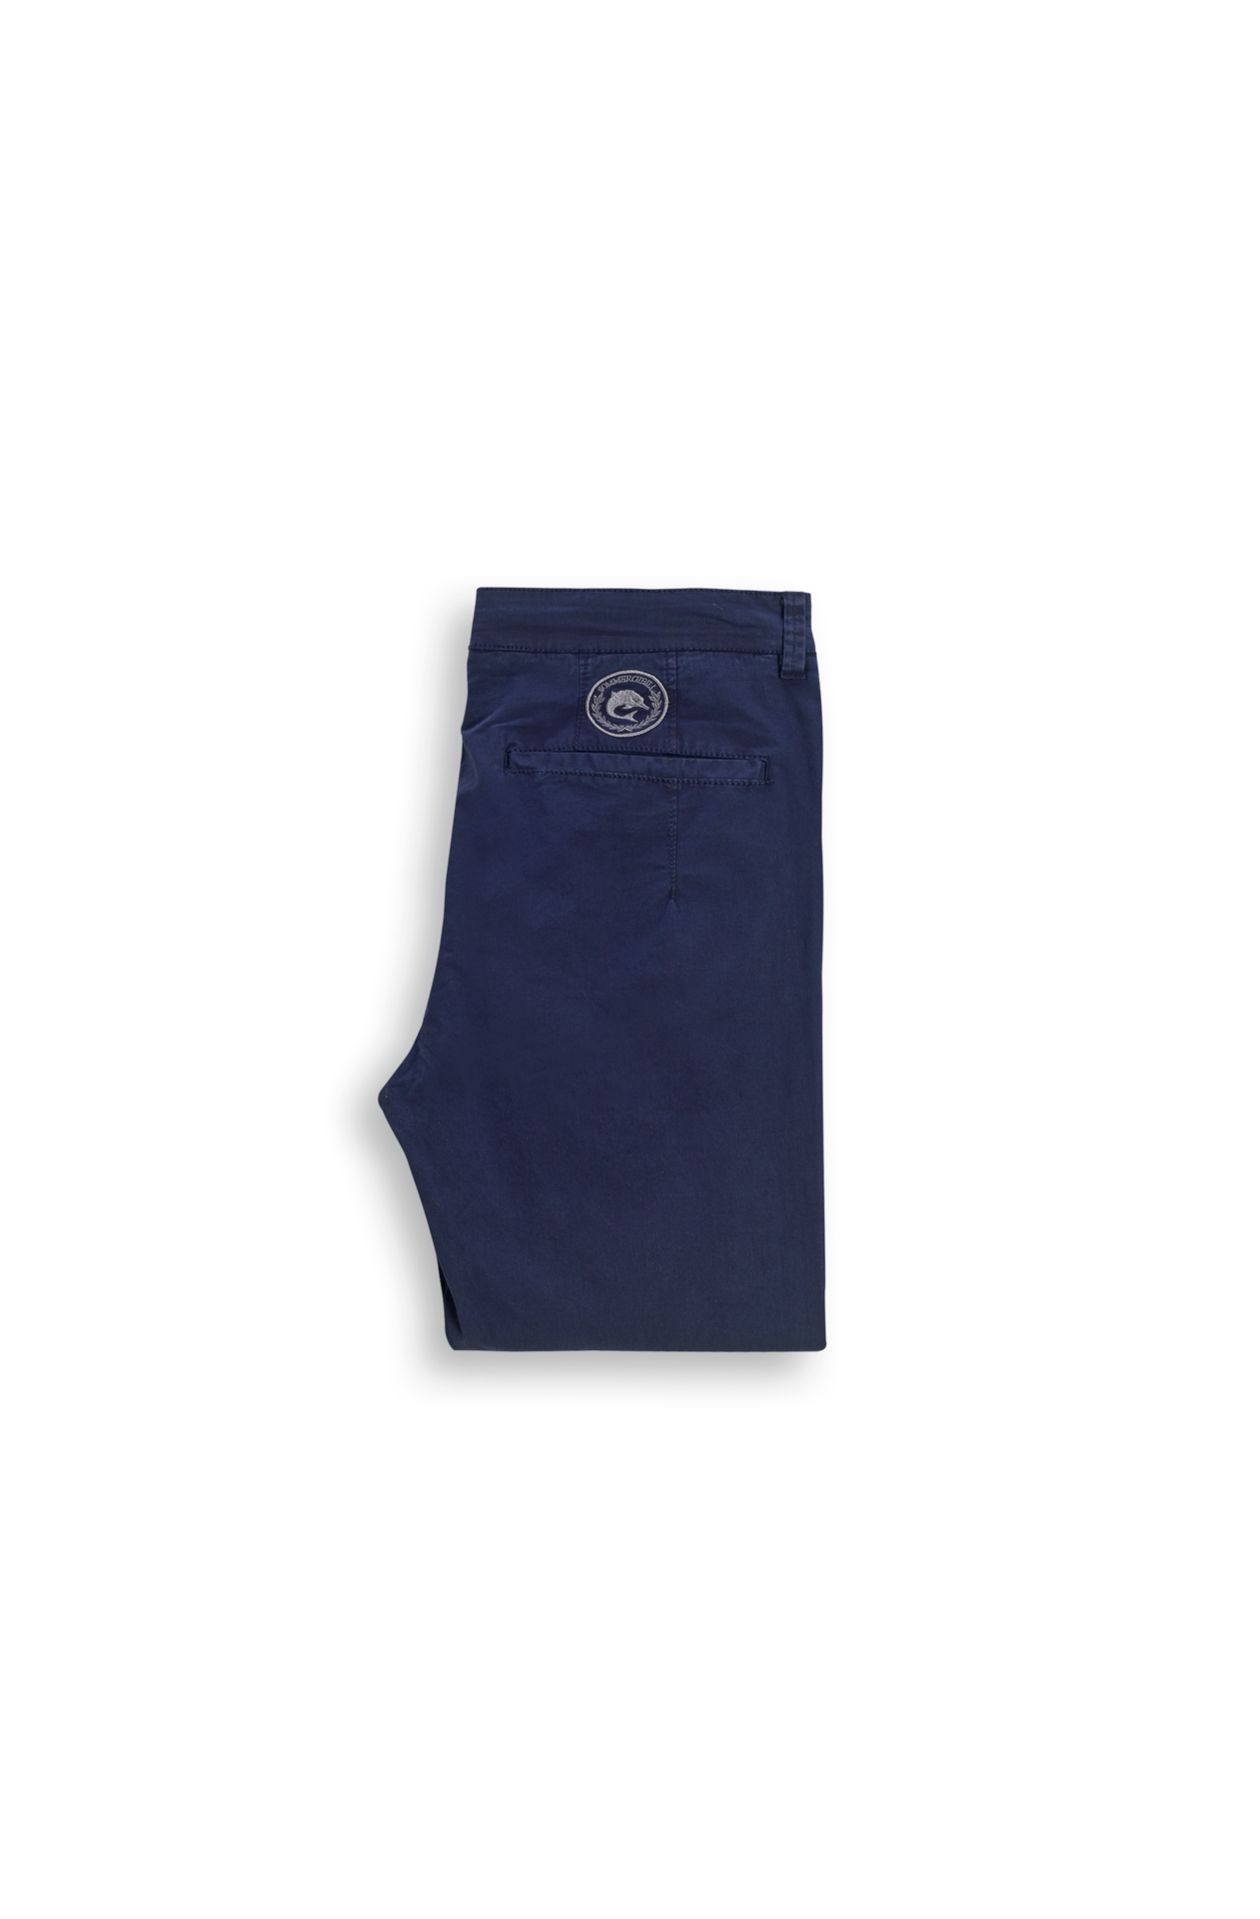 Five pocket trousers